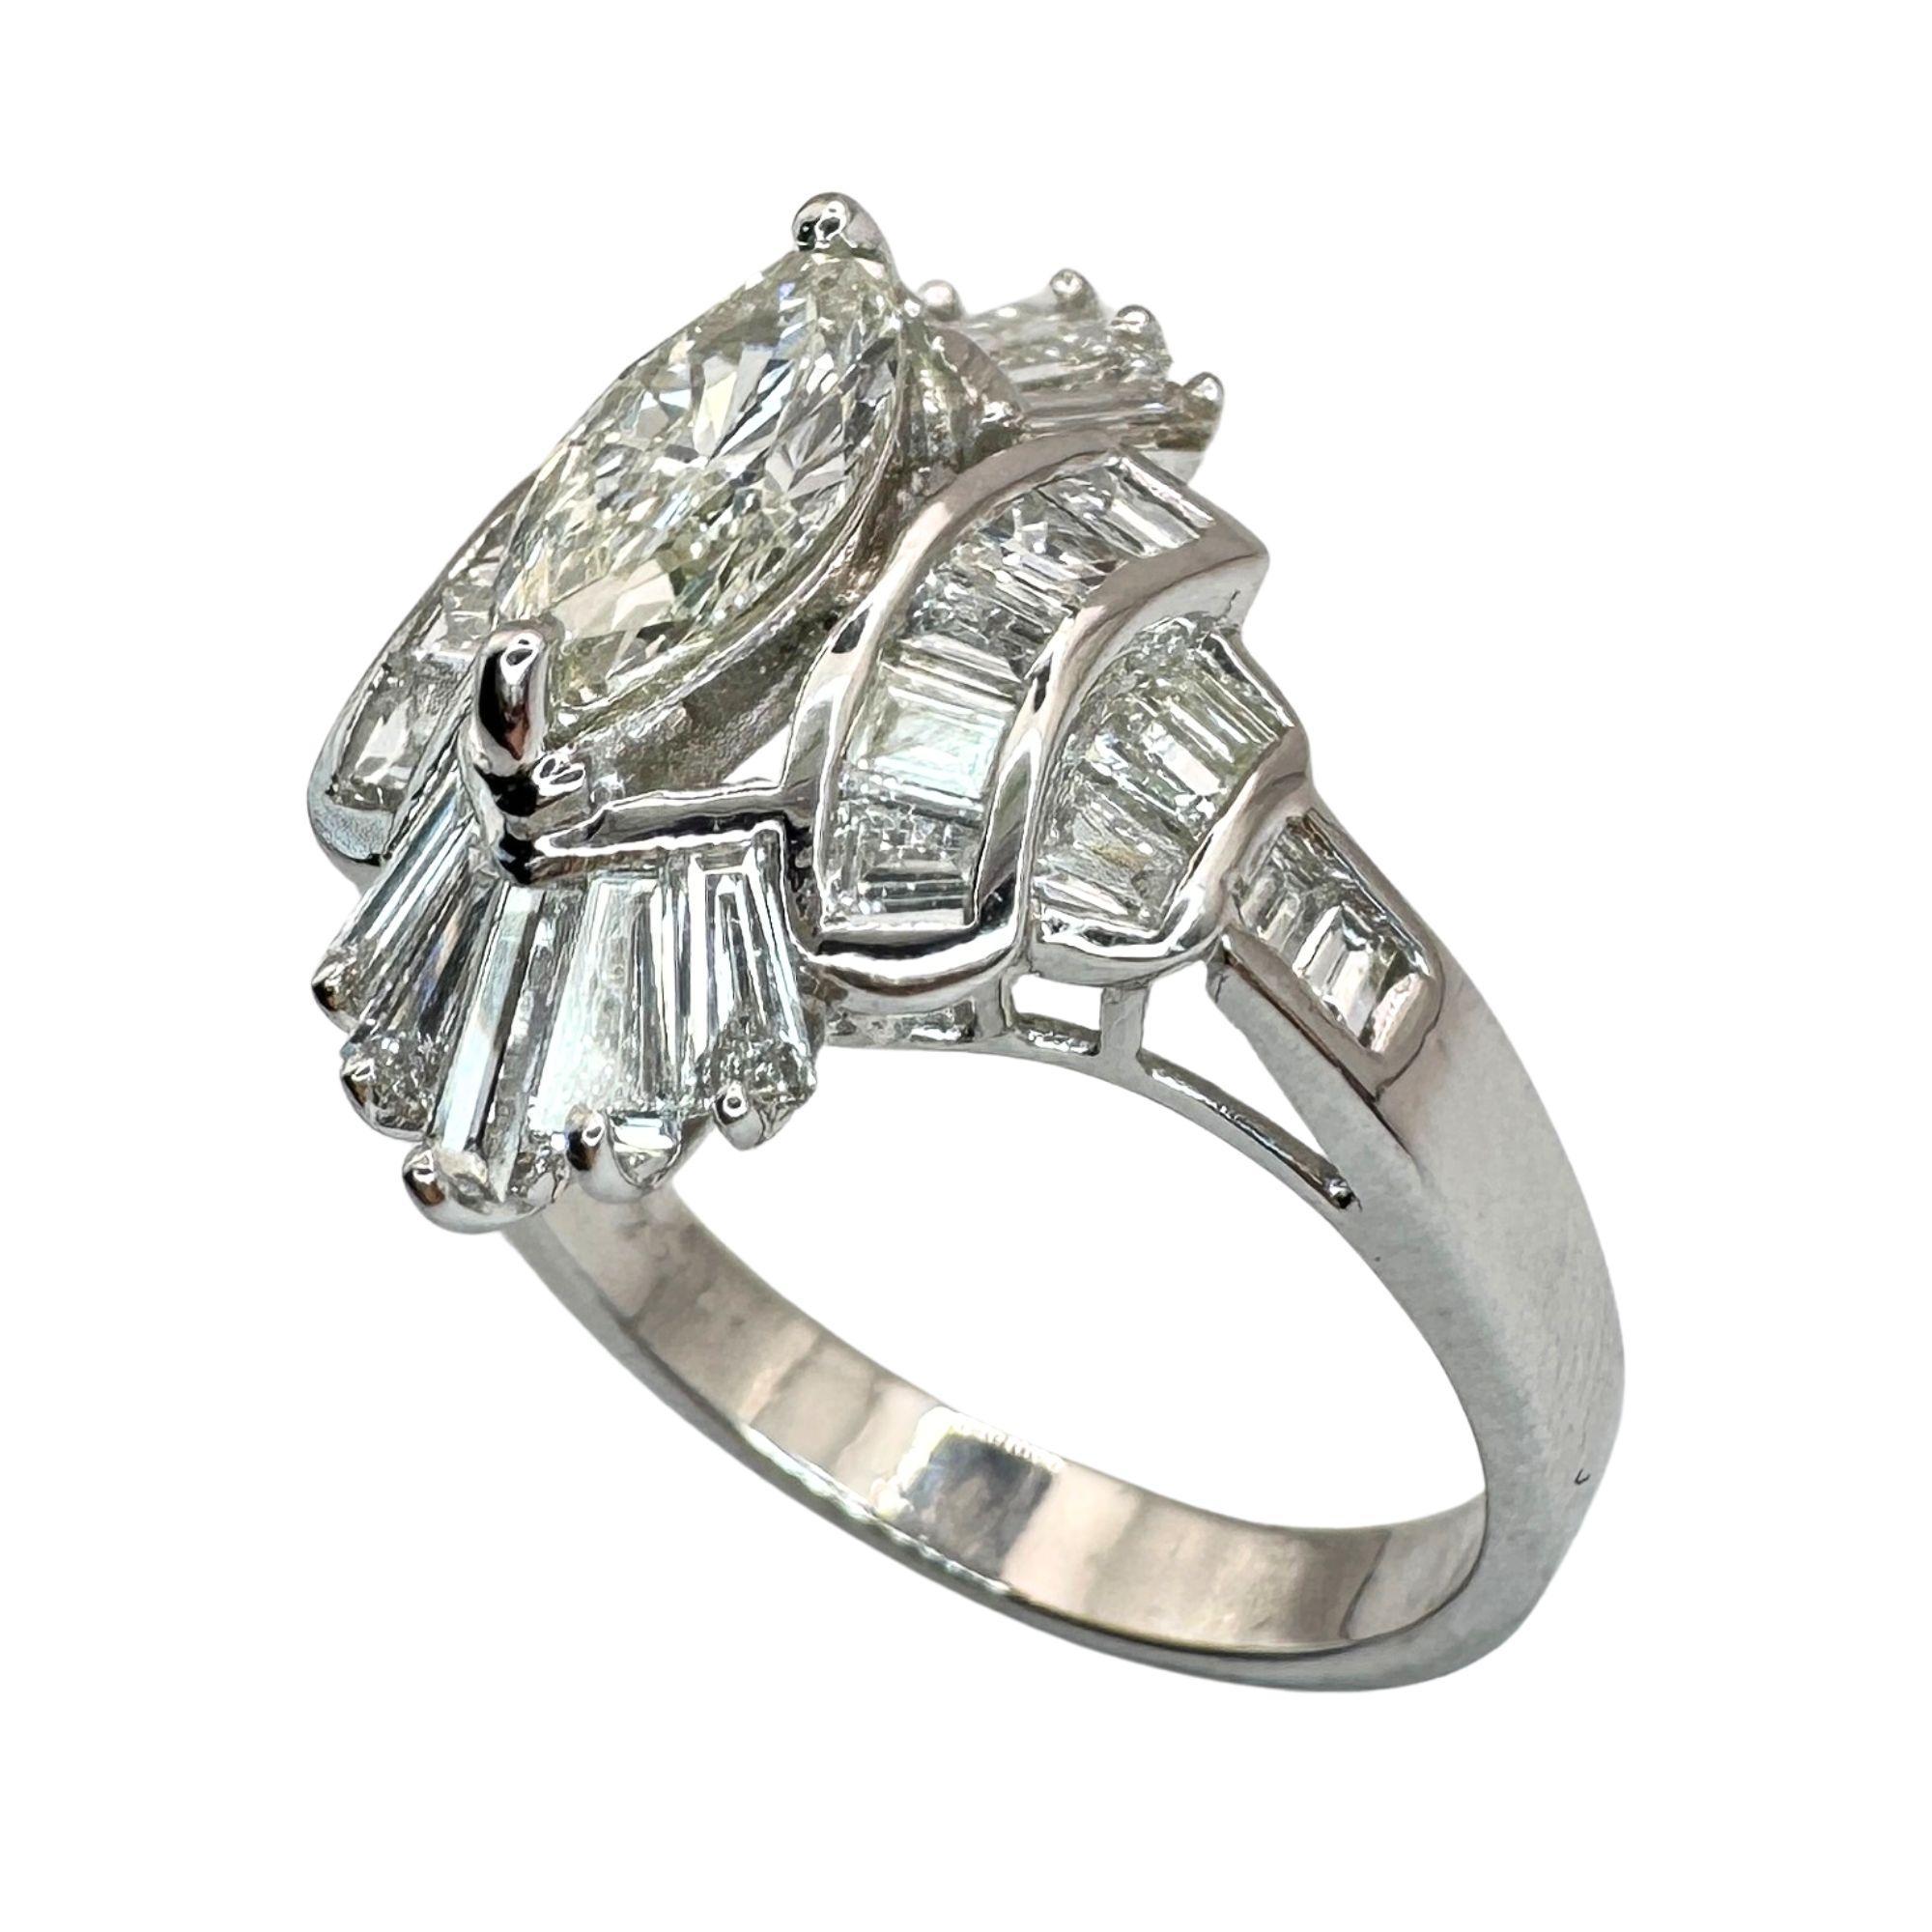 This 18k Baguette and Marquise Cut Diamond Navette Ring exudes elegance and luxury with its intricate design and 1.79 carats of dazzling diamonds. Crafted in 18k white gold, this ring is marked with a 